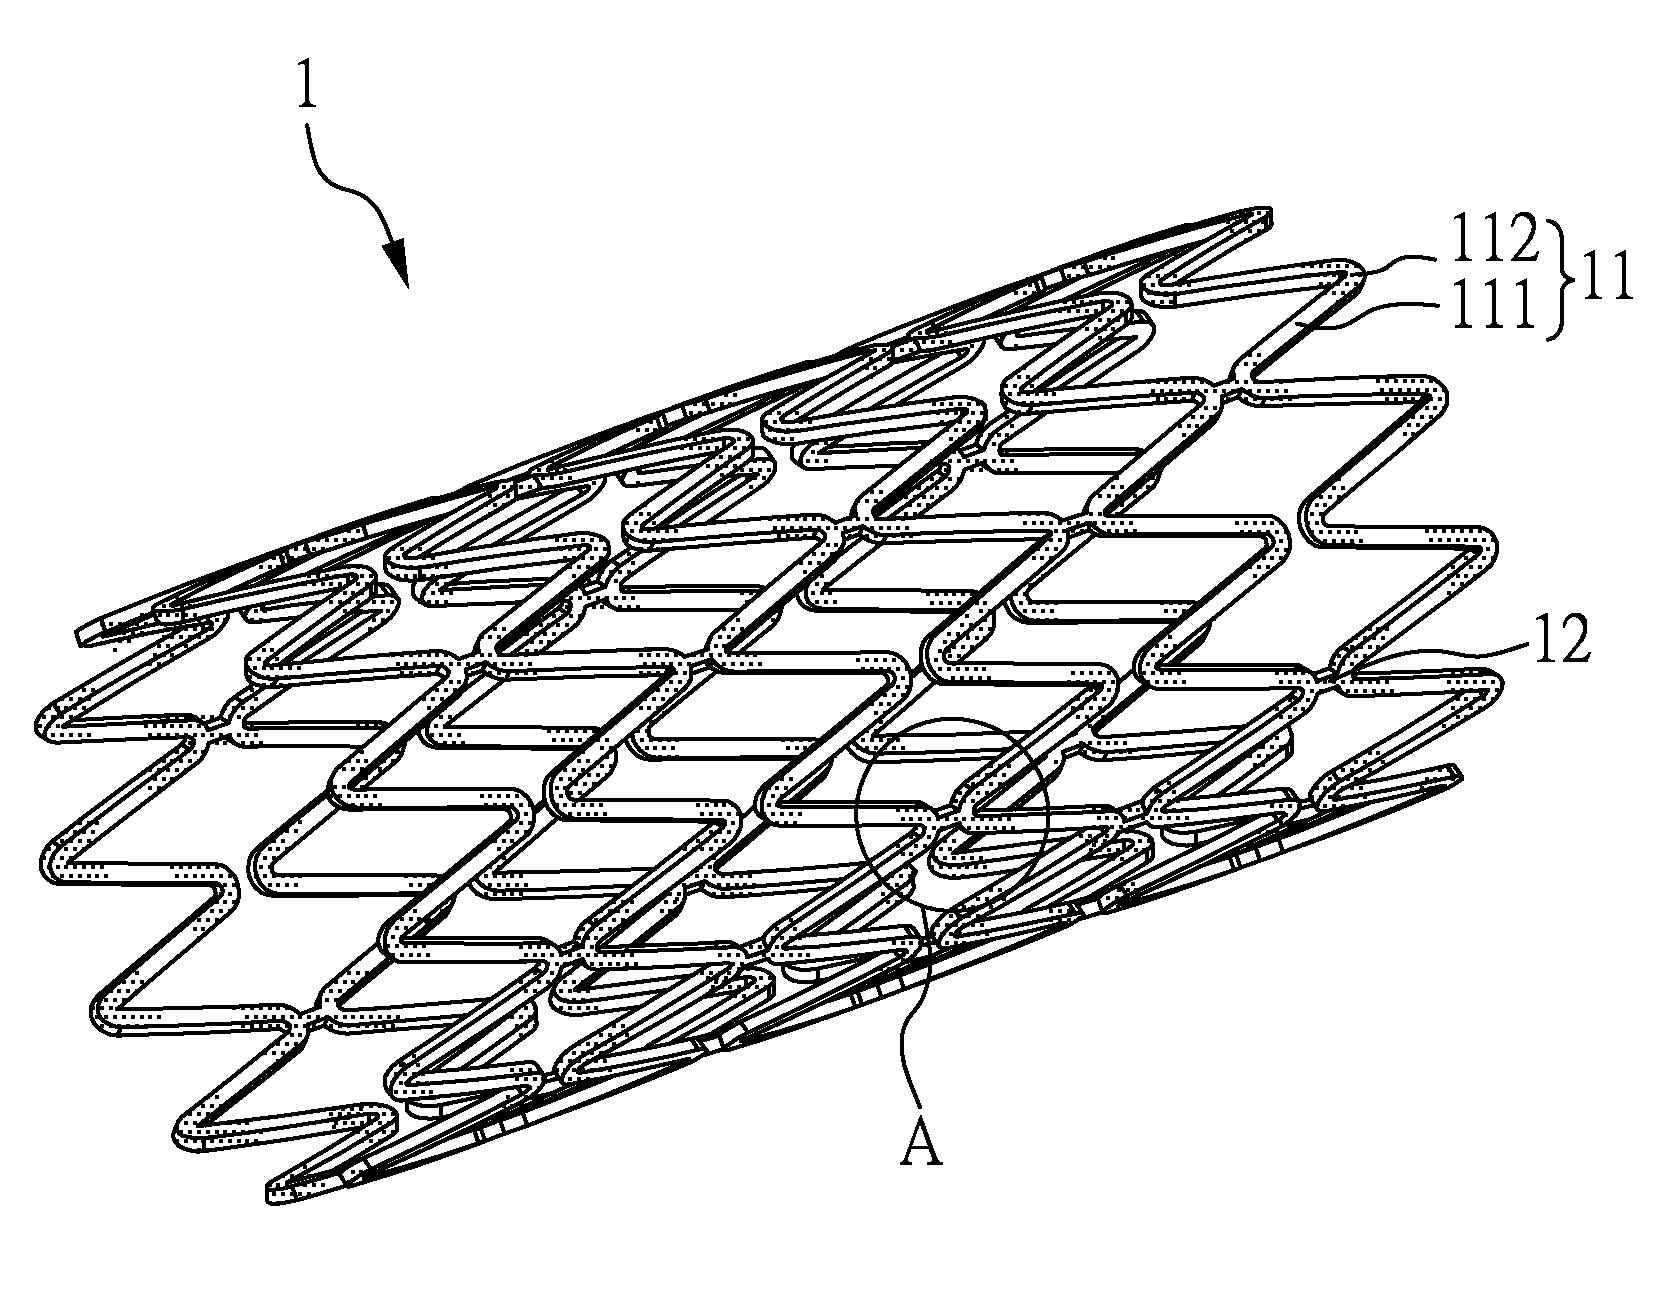 Intravascular stent with regio-selective materials and structures